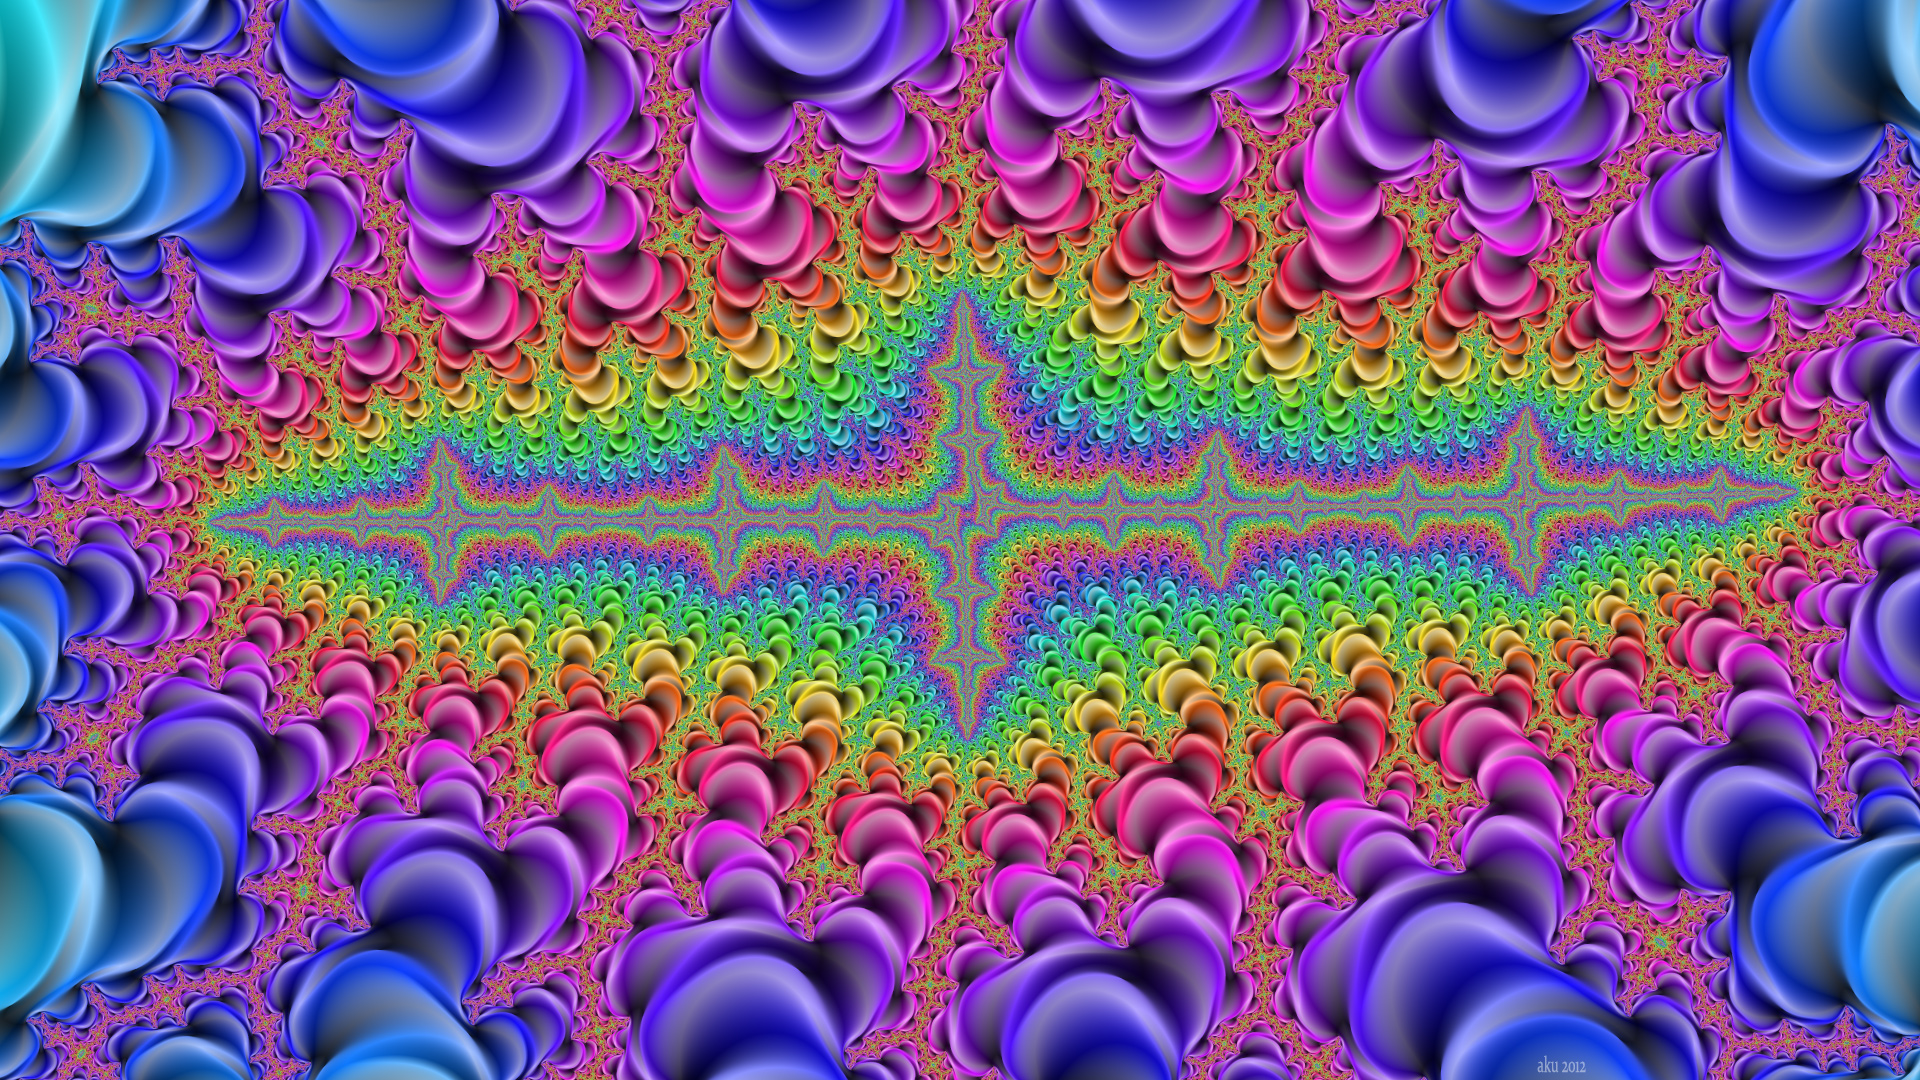 psychedelic Free HD pic